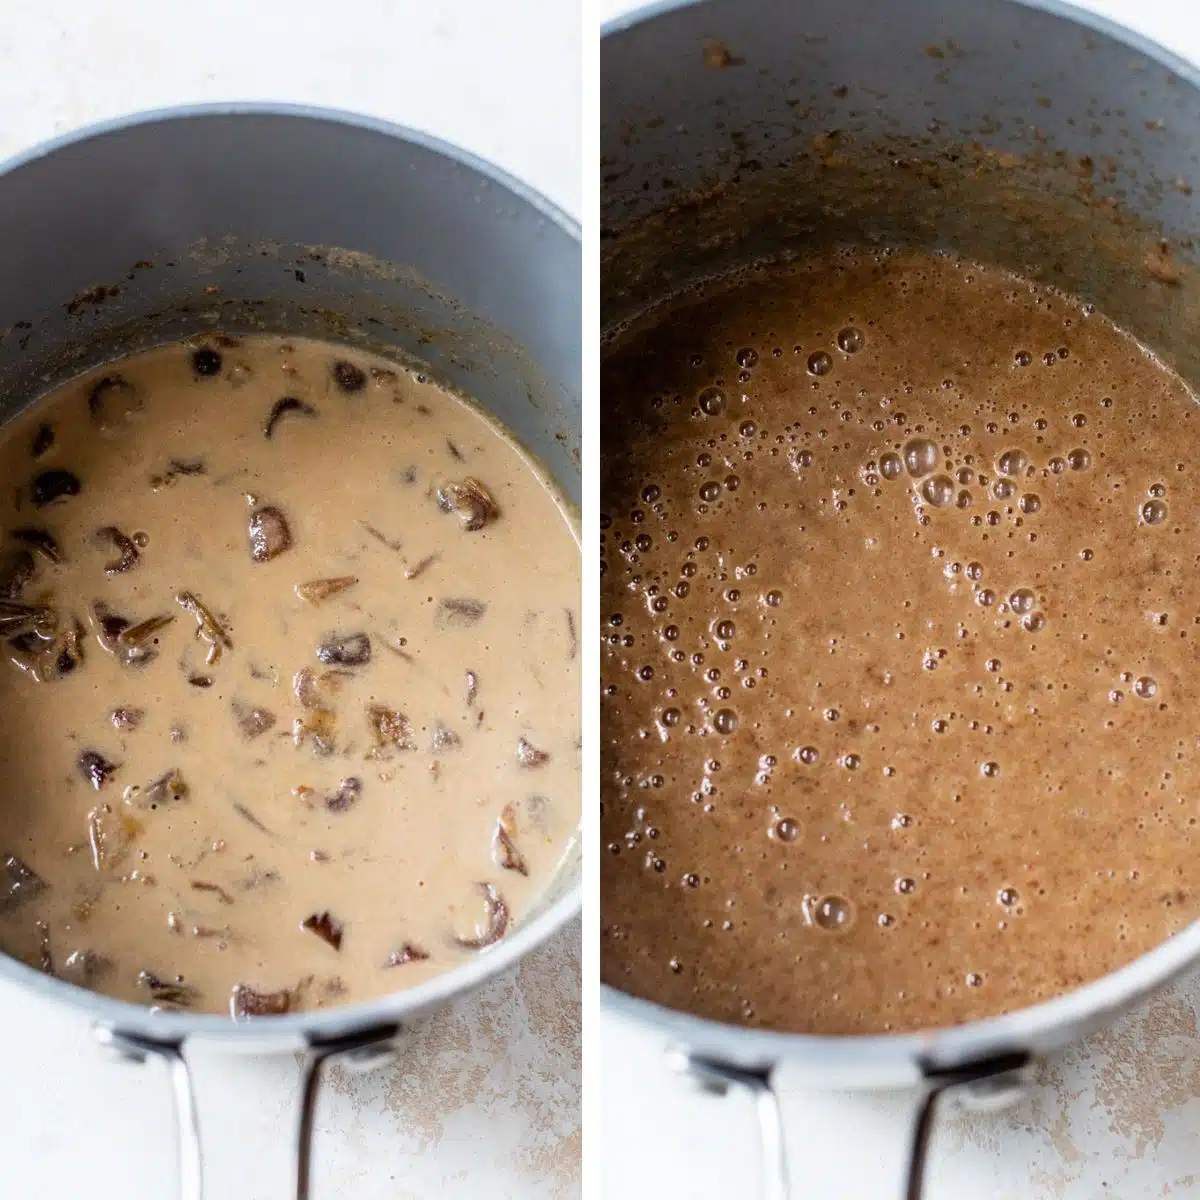 2 images: the left image shows milk and dates simmering together in a saucepan and the right image shows the date mixture blended together in the saucepan